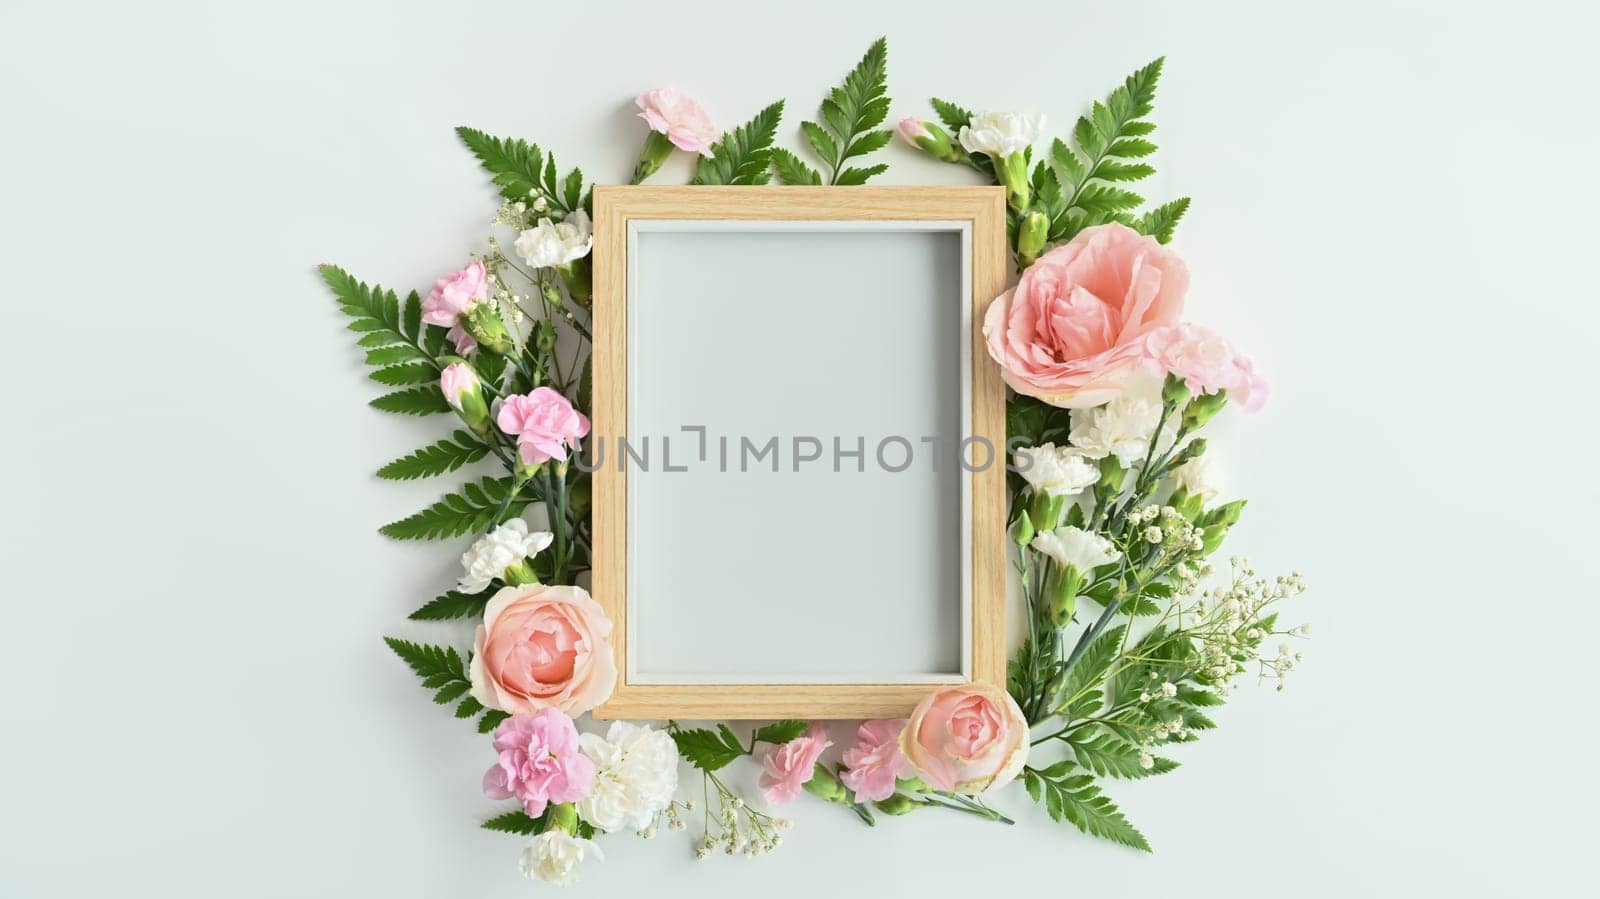 Wooden picture frame with pink rose, carnation and fern leaves on white background. Spring floral background, copy space.